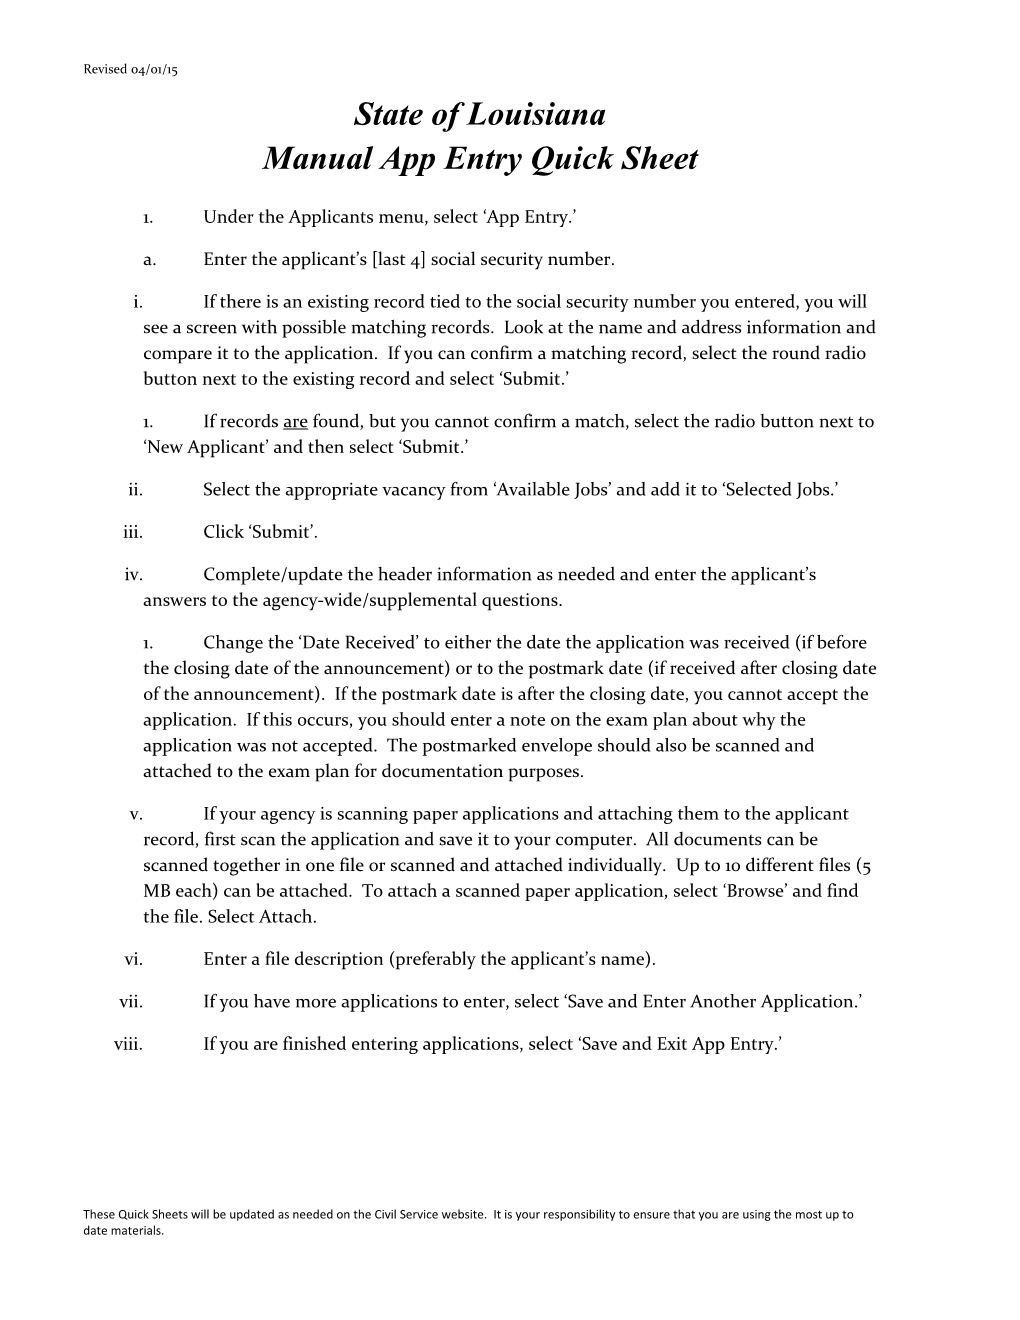 State of Louisiana Manual App Entry Quick Sheet